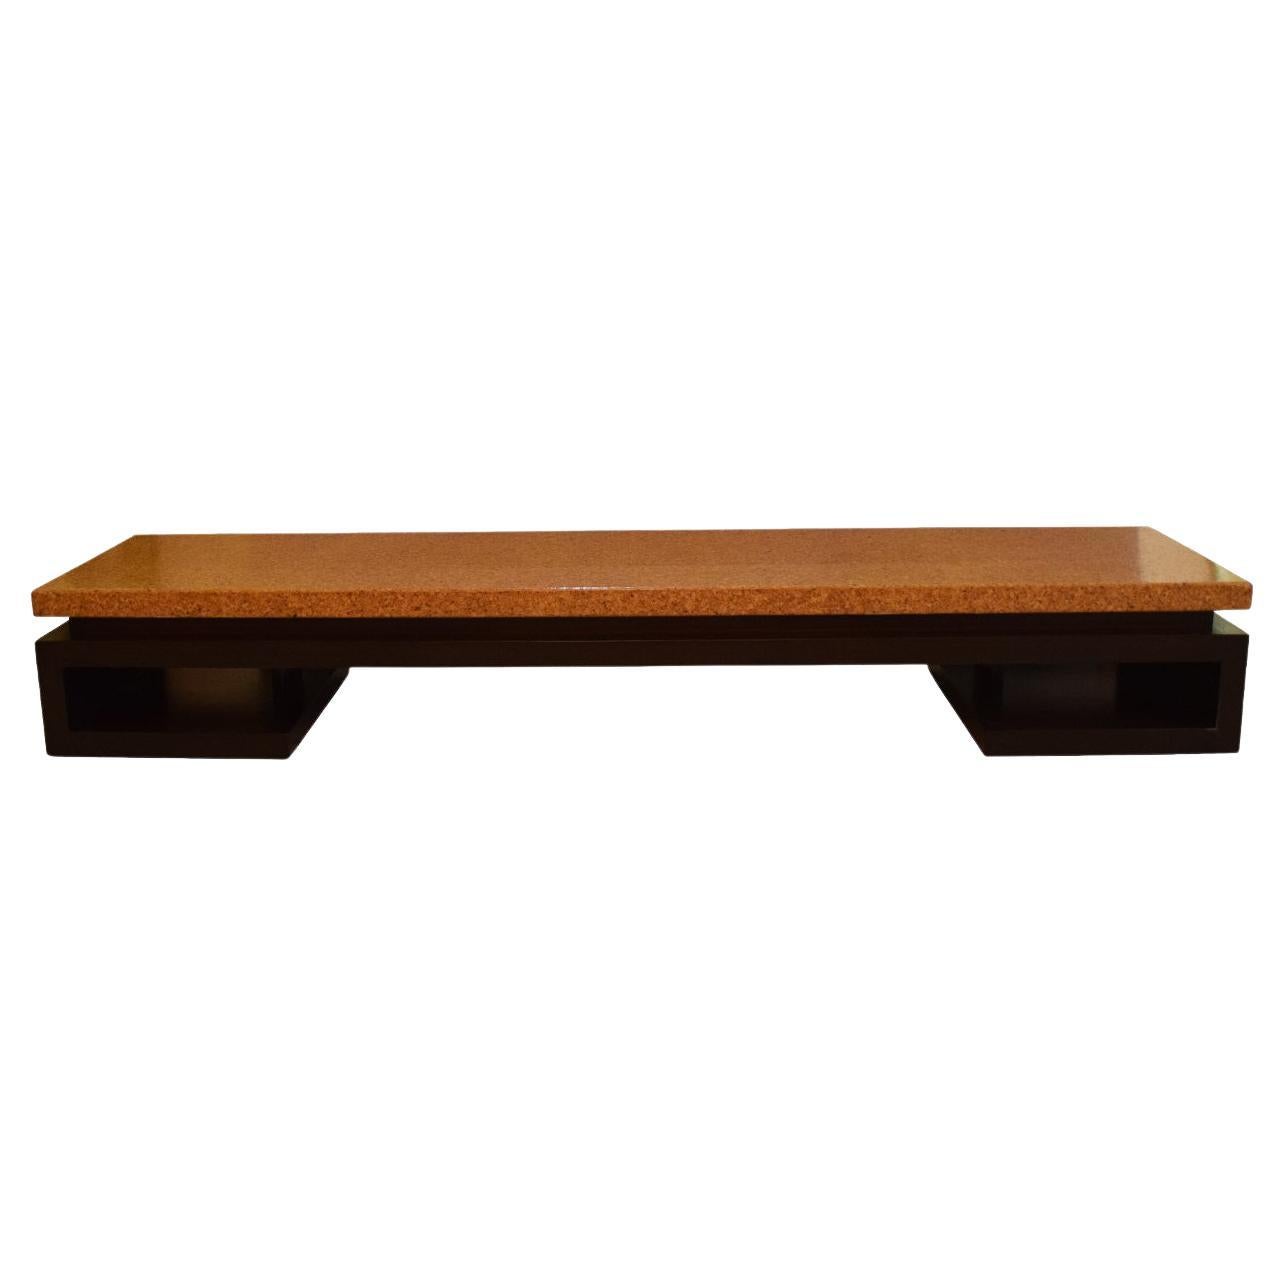 Paul Frankl Low Cork Table/Bench 1940’s Fot Johnson Furniture Co.